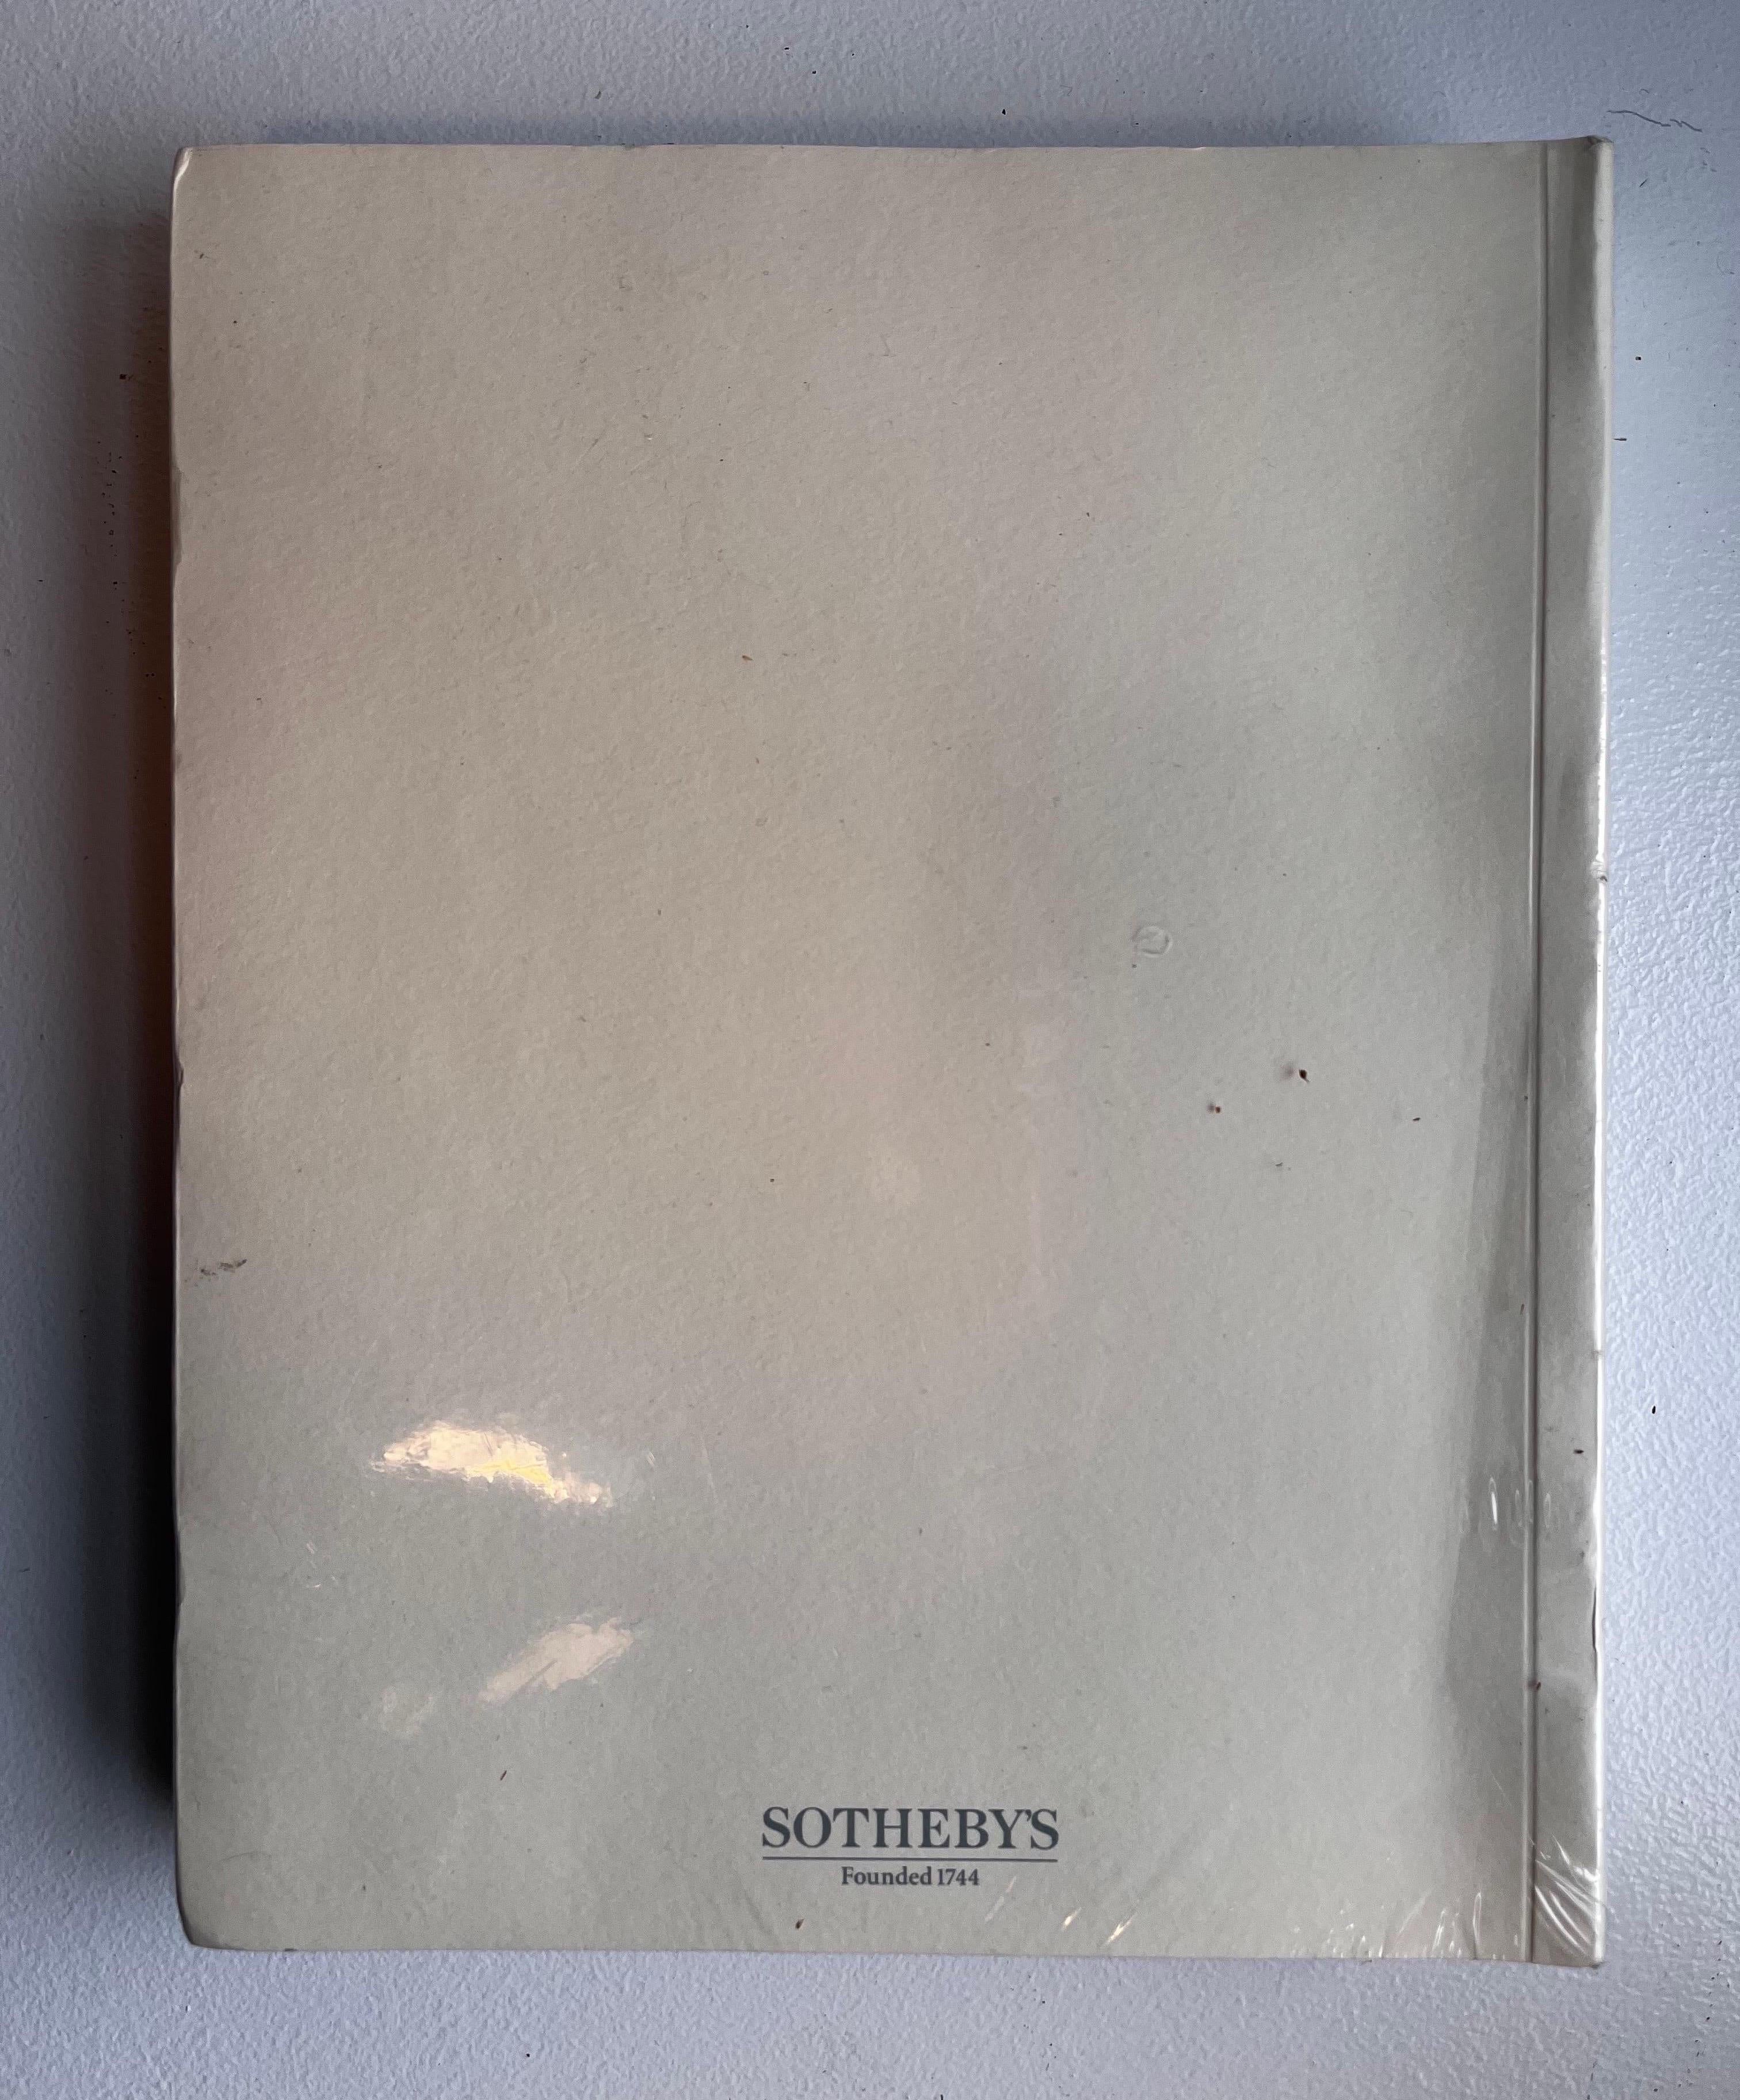 Modern Jacqueline Kennedy Onassis, Sotheby's Auction Catalogue, New in Wrapper For Sale